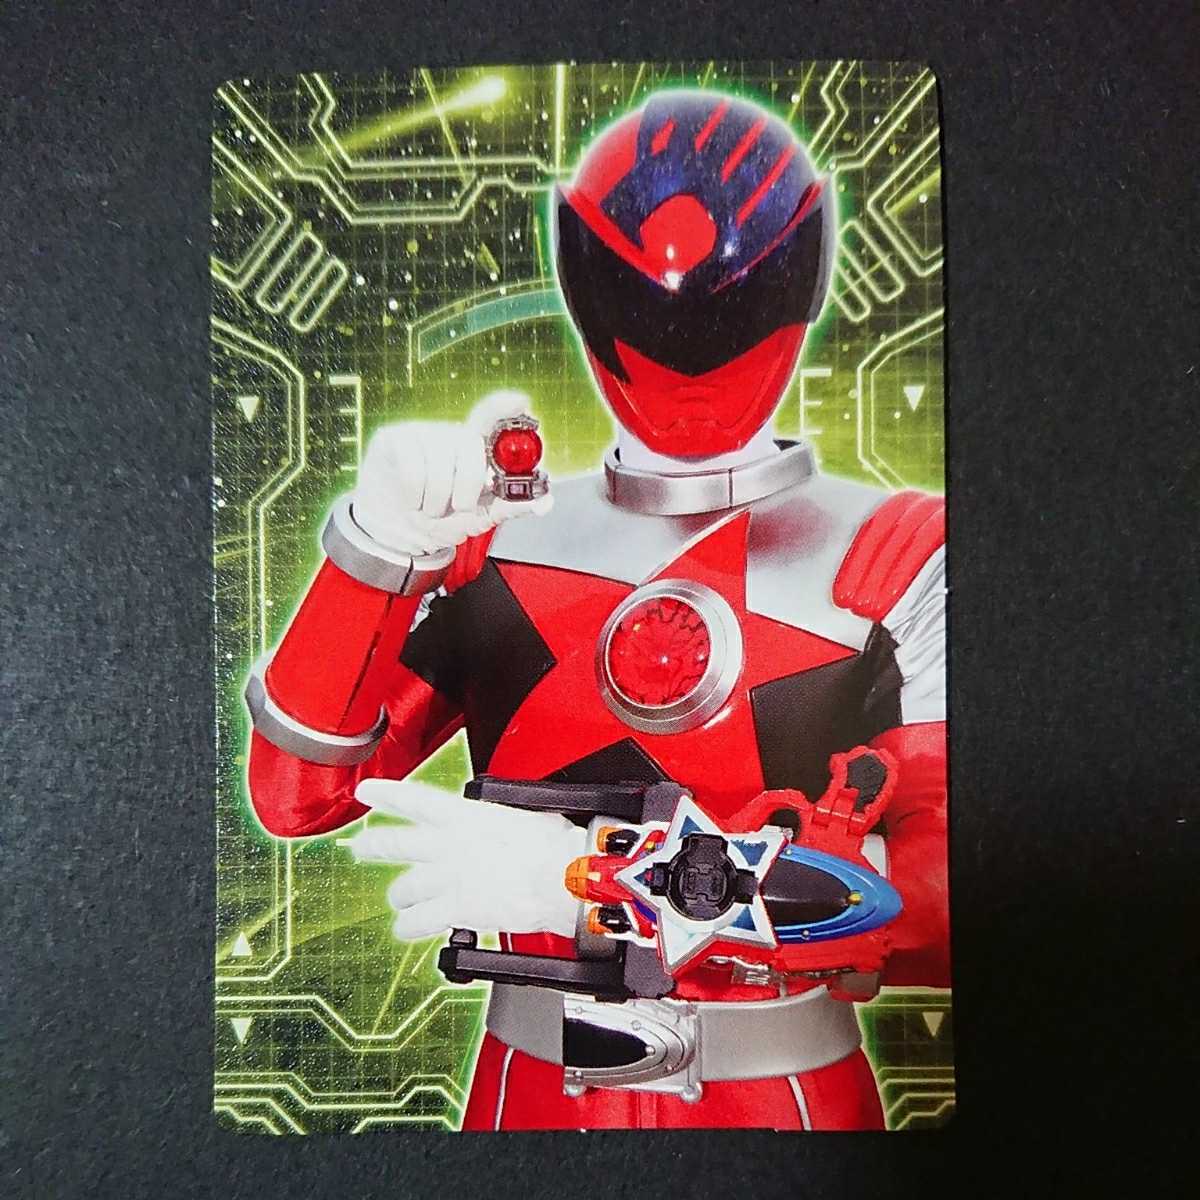  out of print card [37 cue tama( cosmos Squadron kyuu Ranger card chewing gum )] super Squadron Series. super valuable goods 